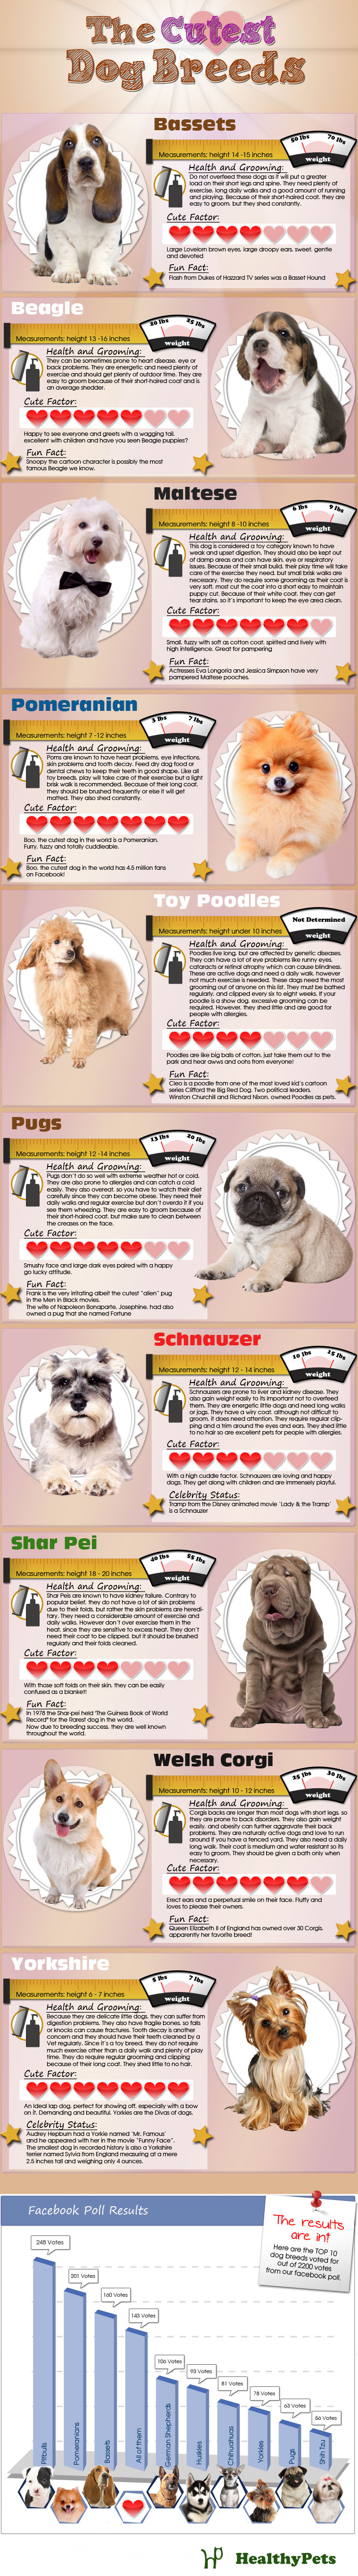 The Cutest Dog Breeds